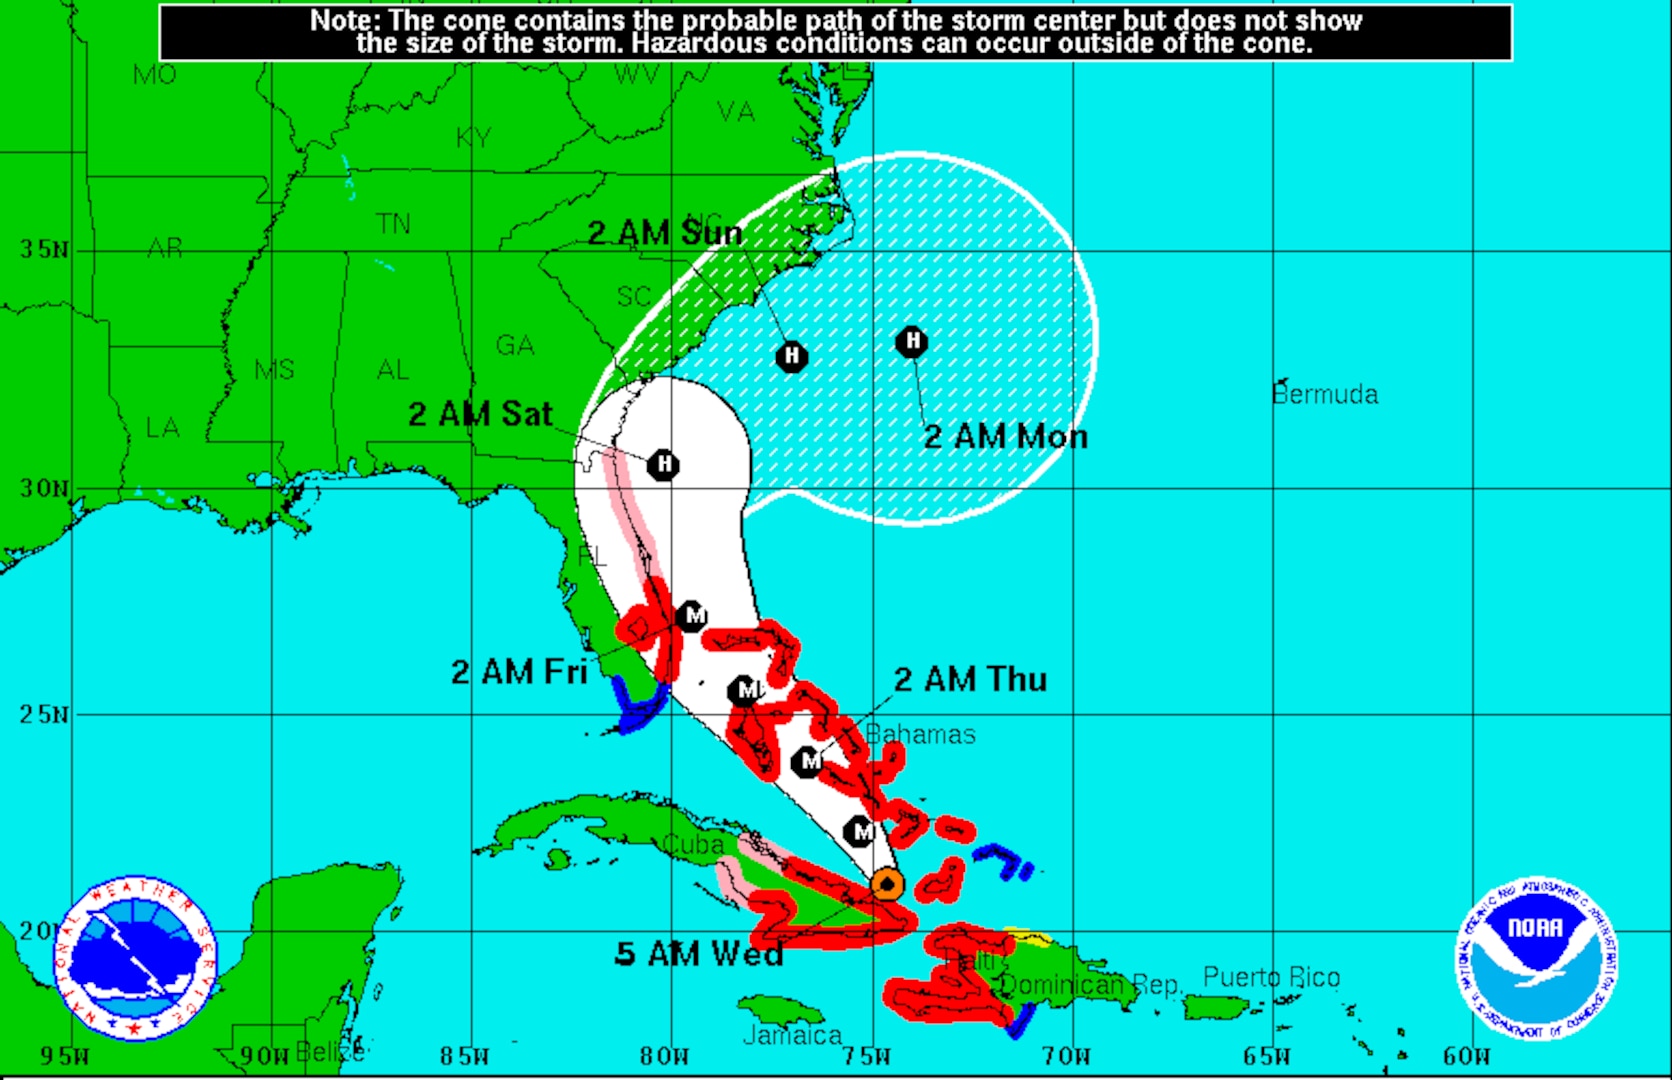 Deadly Hurricane Matthew is projected to near the Florida coast by Thursday. In the meantime, National Guard members in four states have either been called up or are on standby for storm-related assistance to residents.